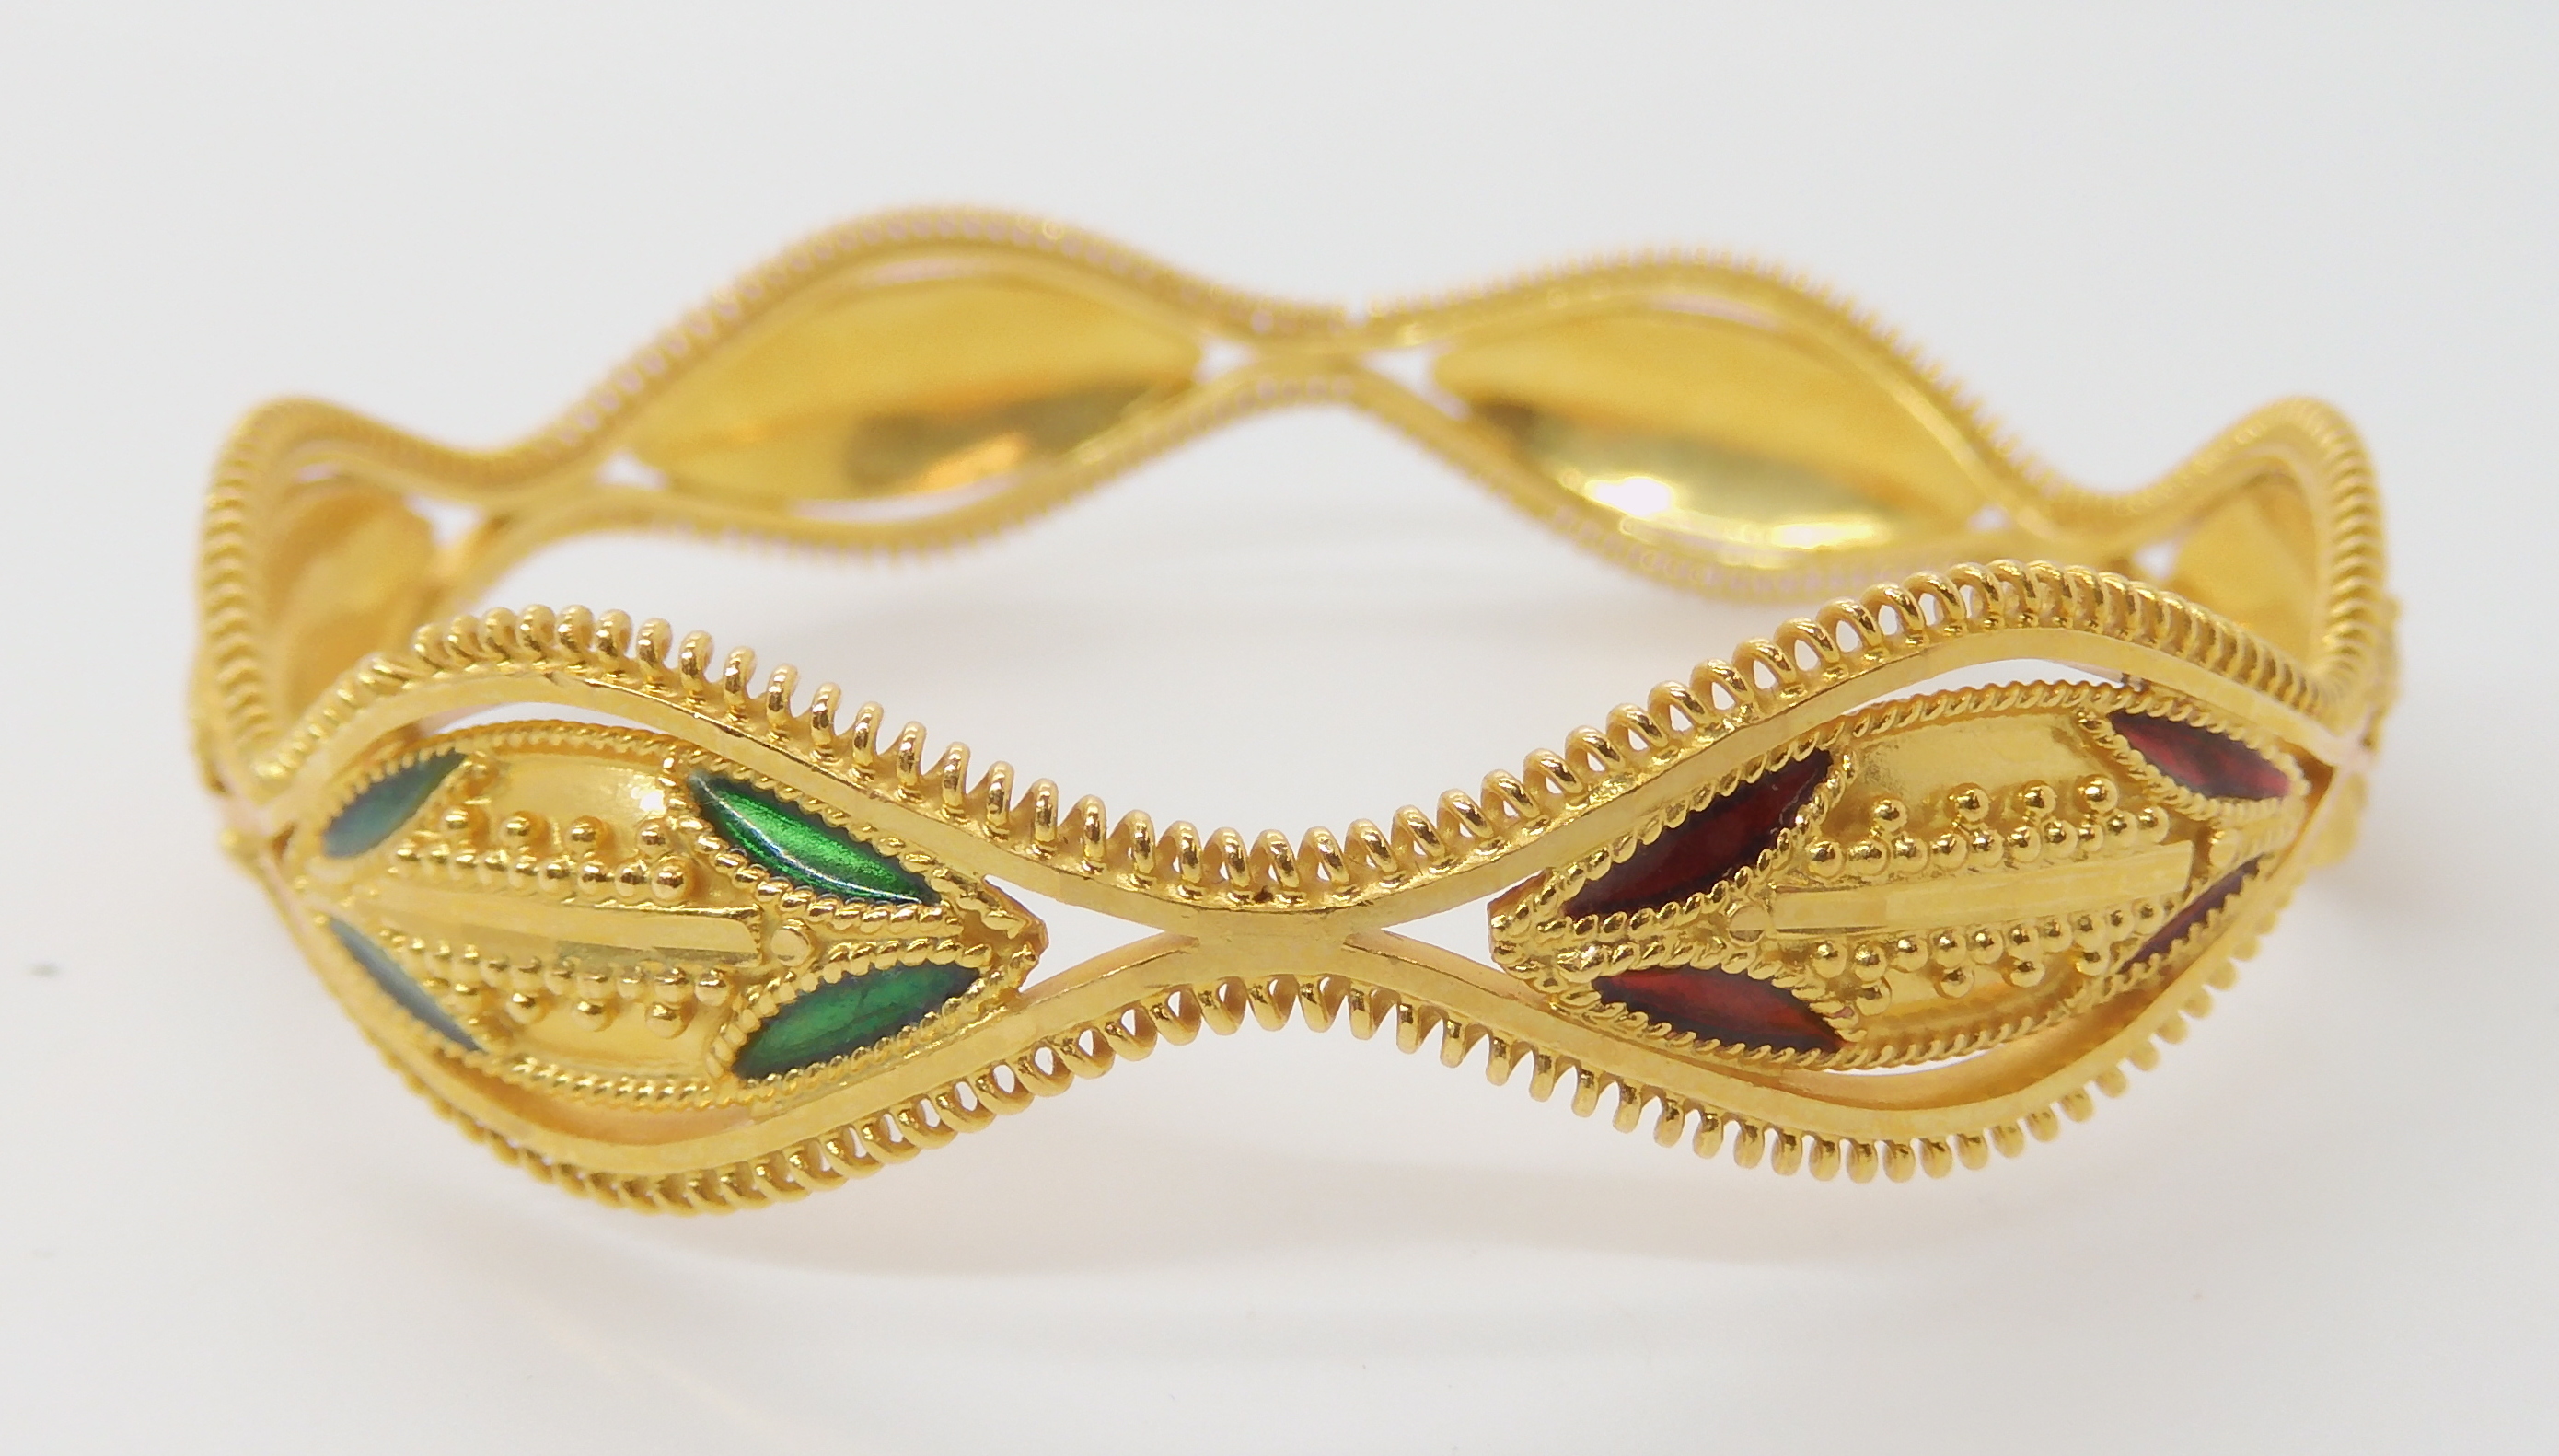 A BRIGHT YELLOW METAL DECORATIVE BANGLE with red and green enamel and granulation detail, stamped